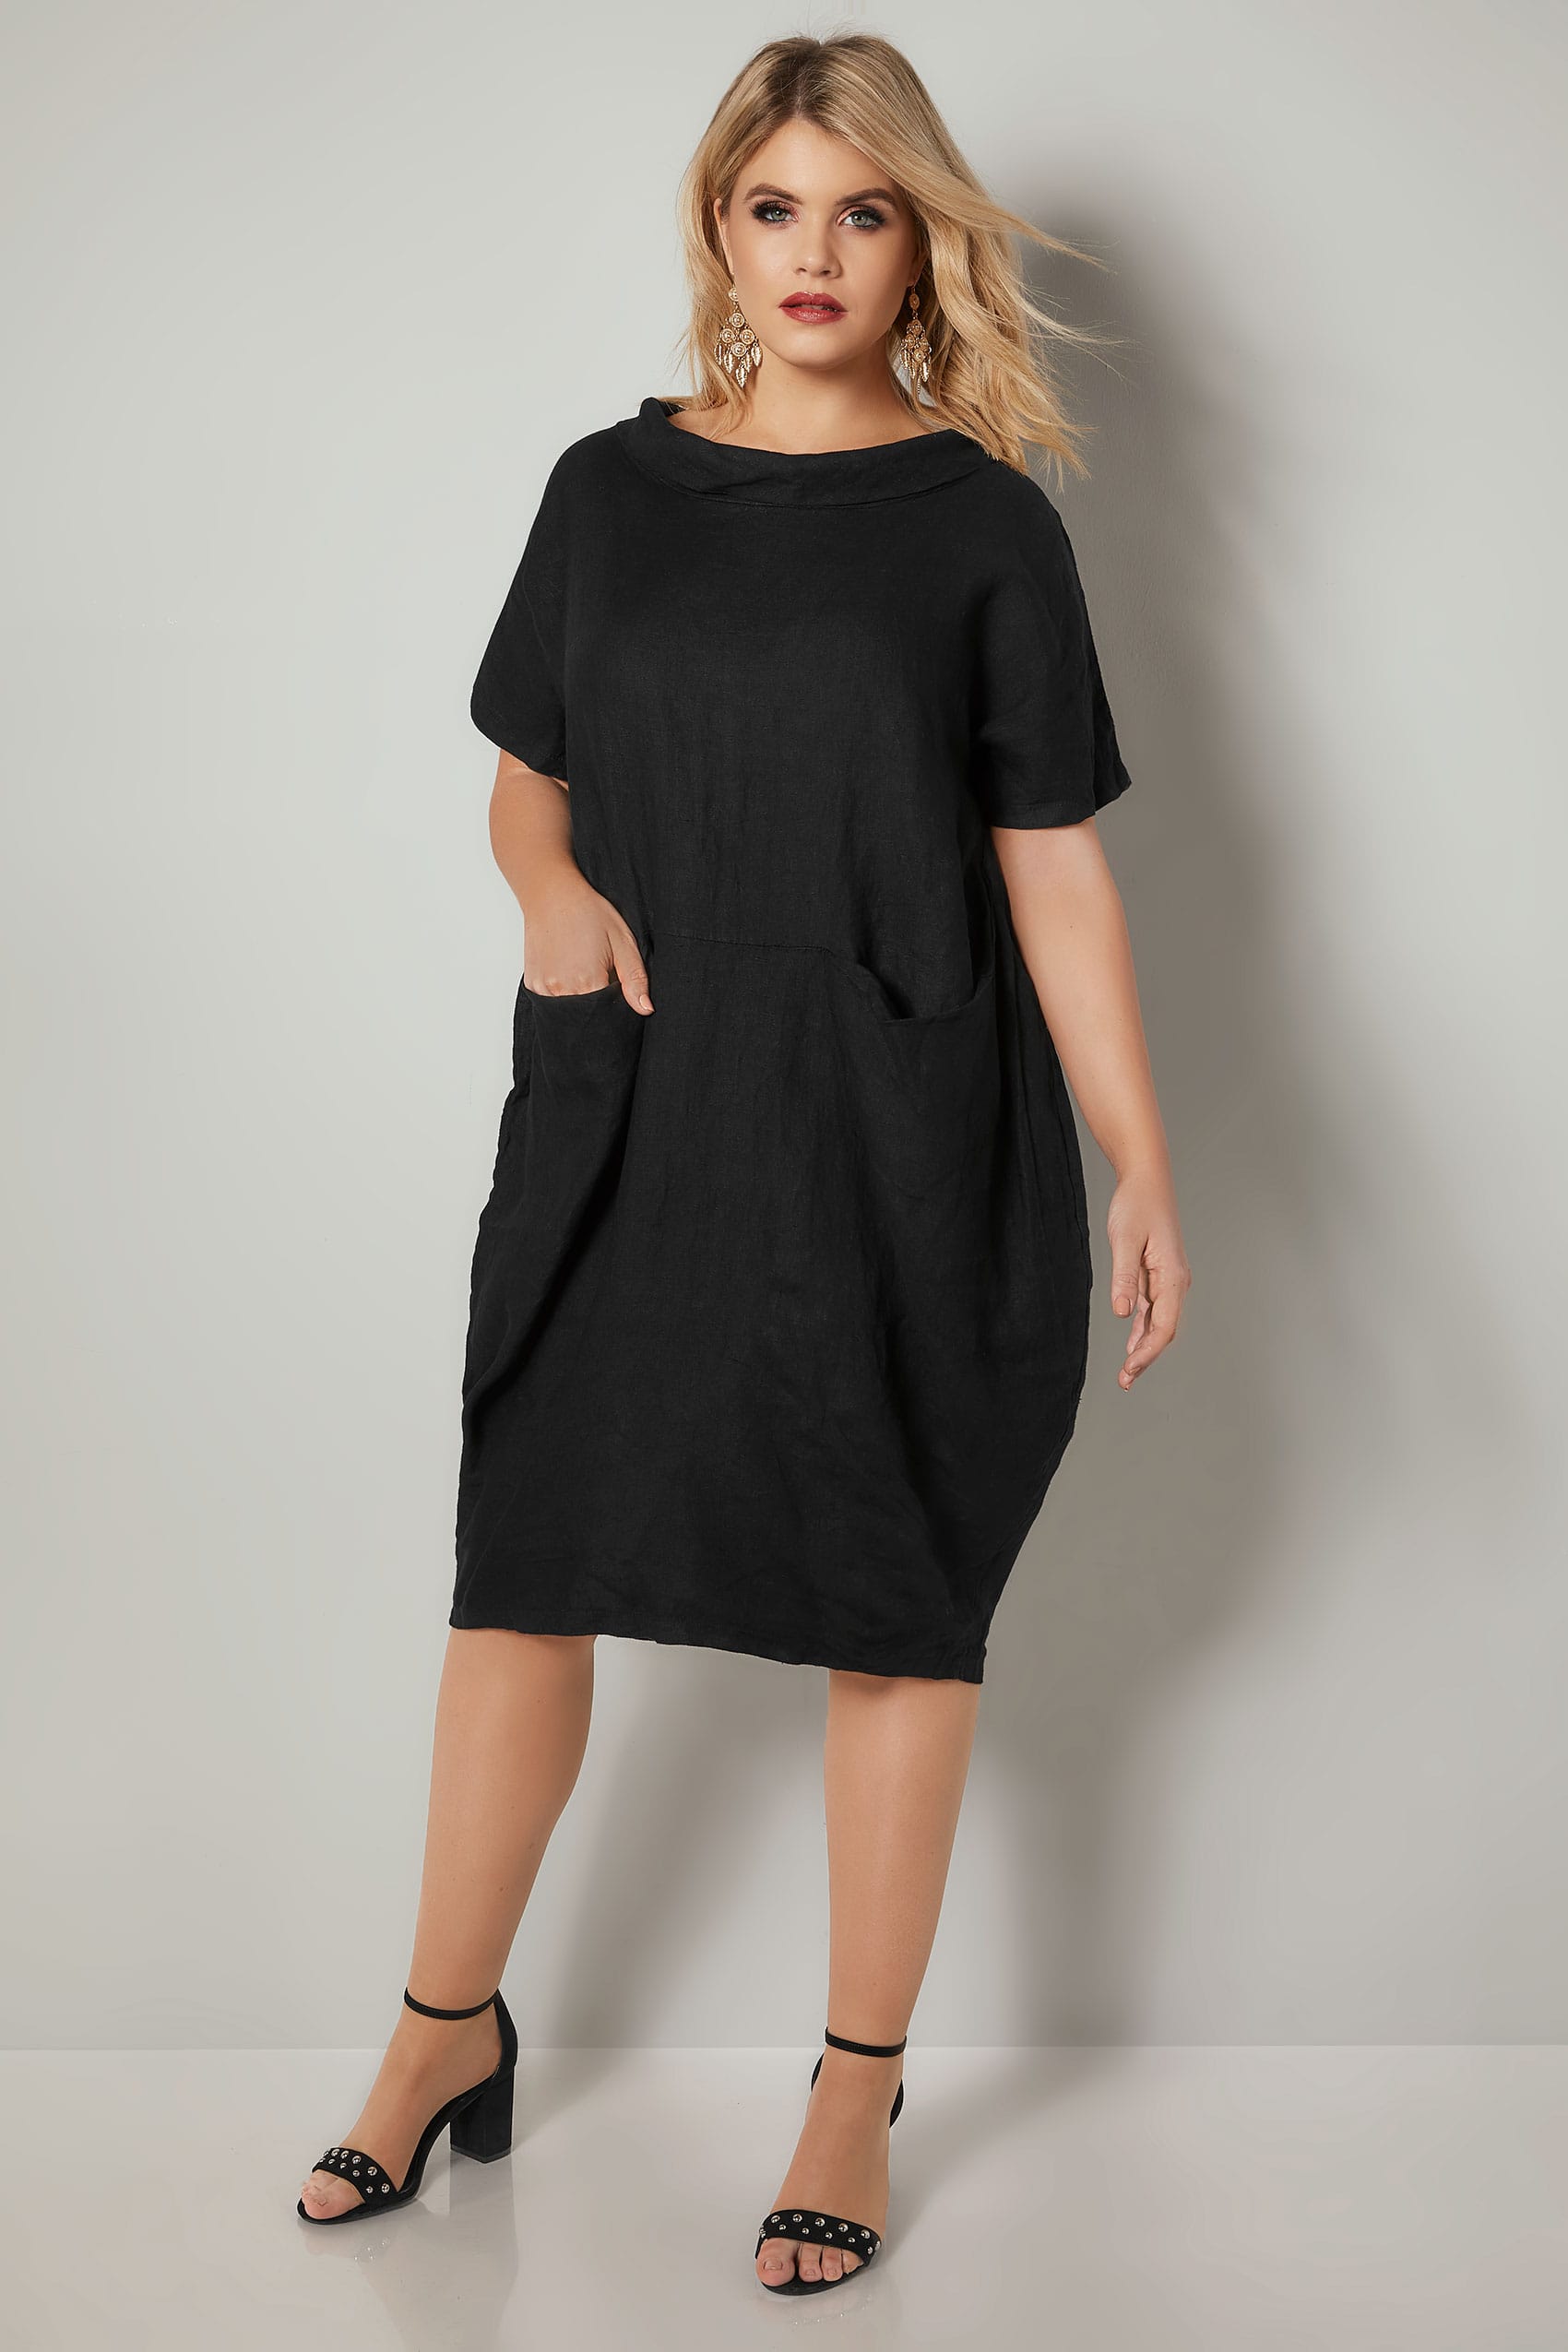 PAPRIKA Black Oversized Dress With Front Pockets, plus size 16 to 24